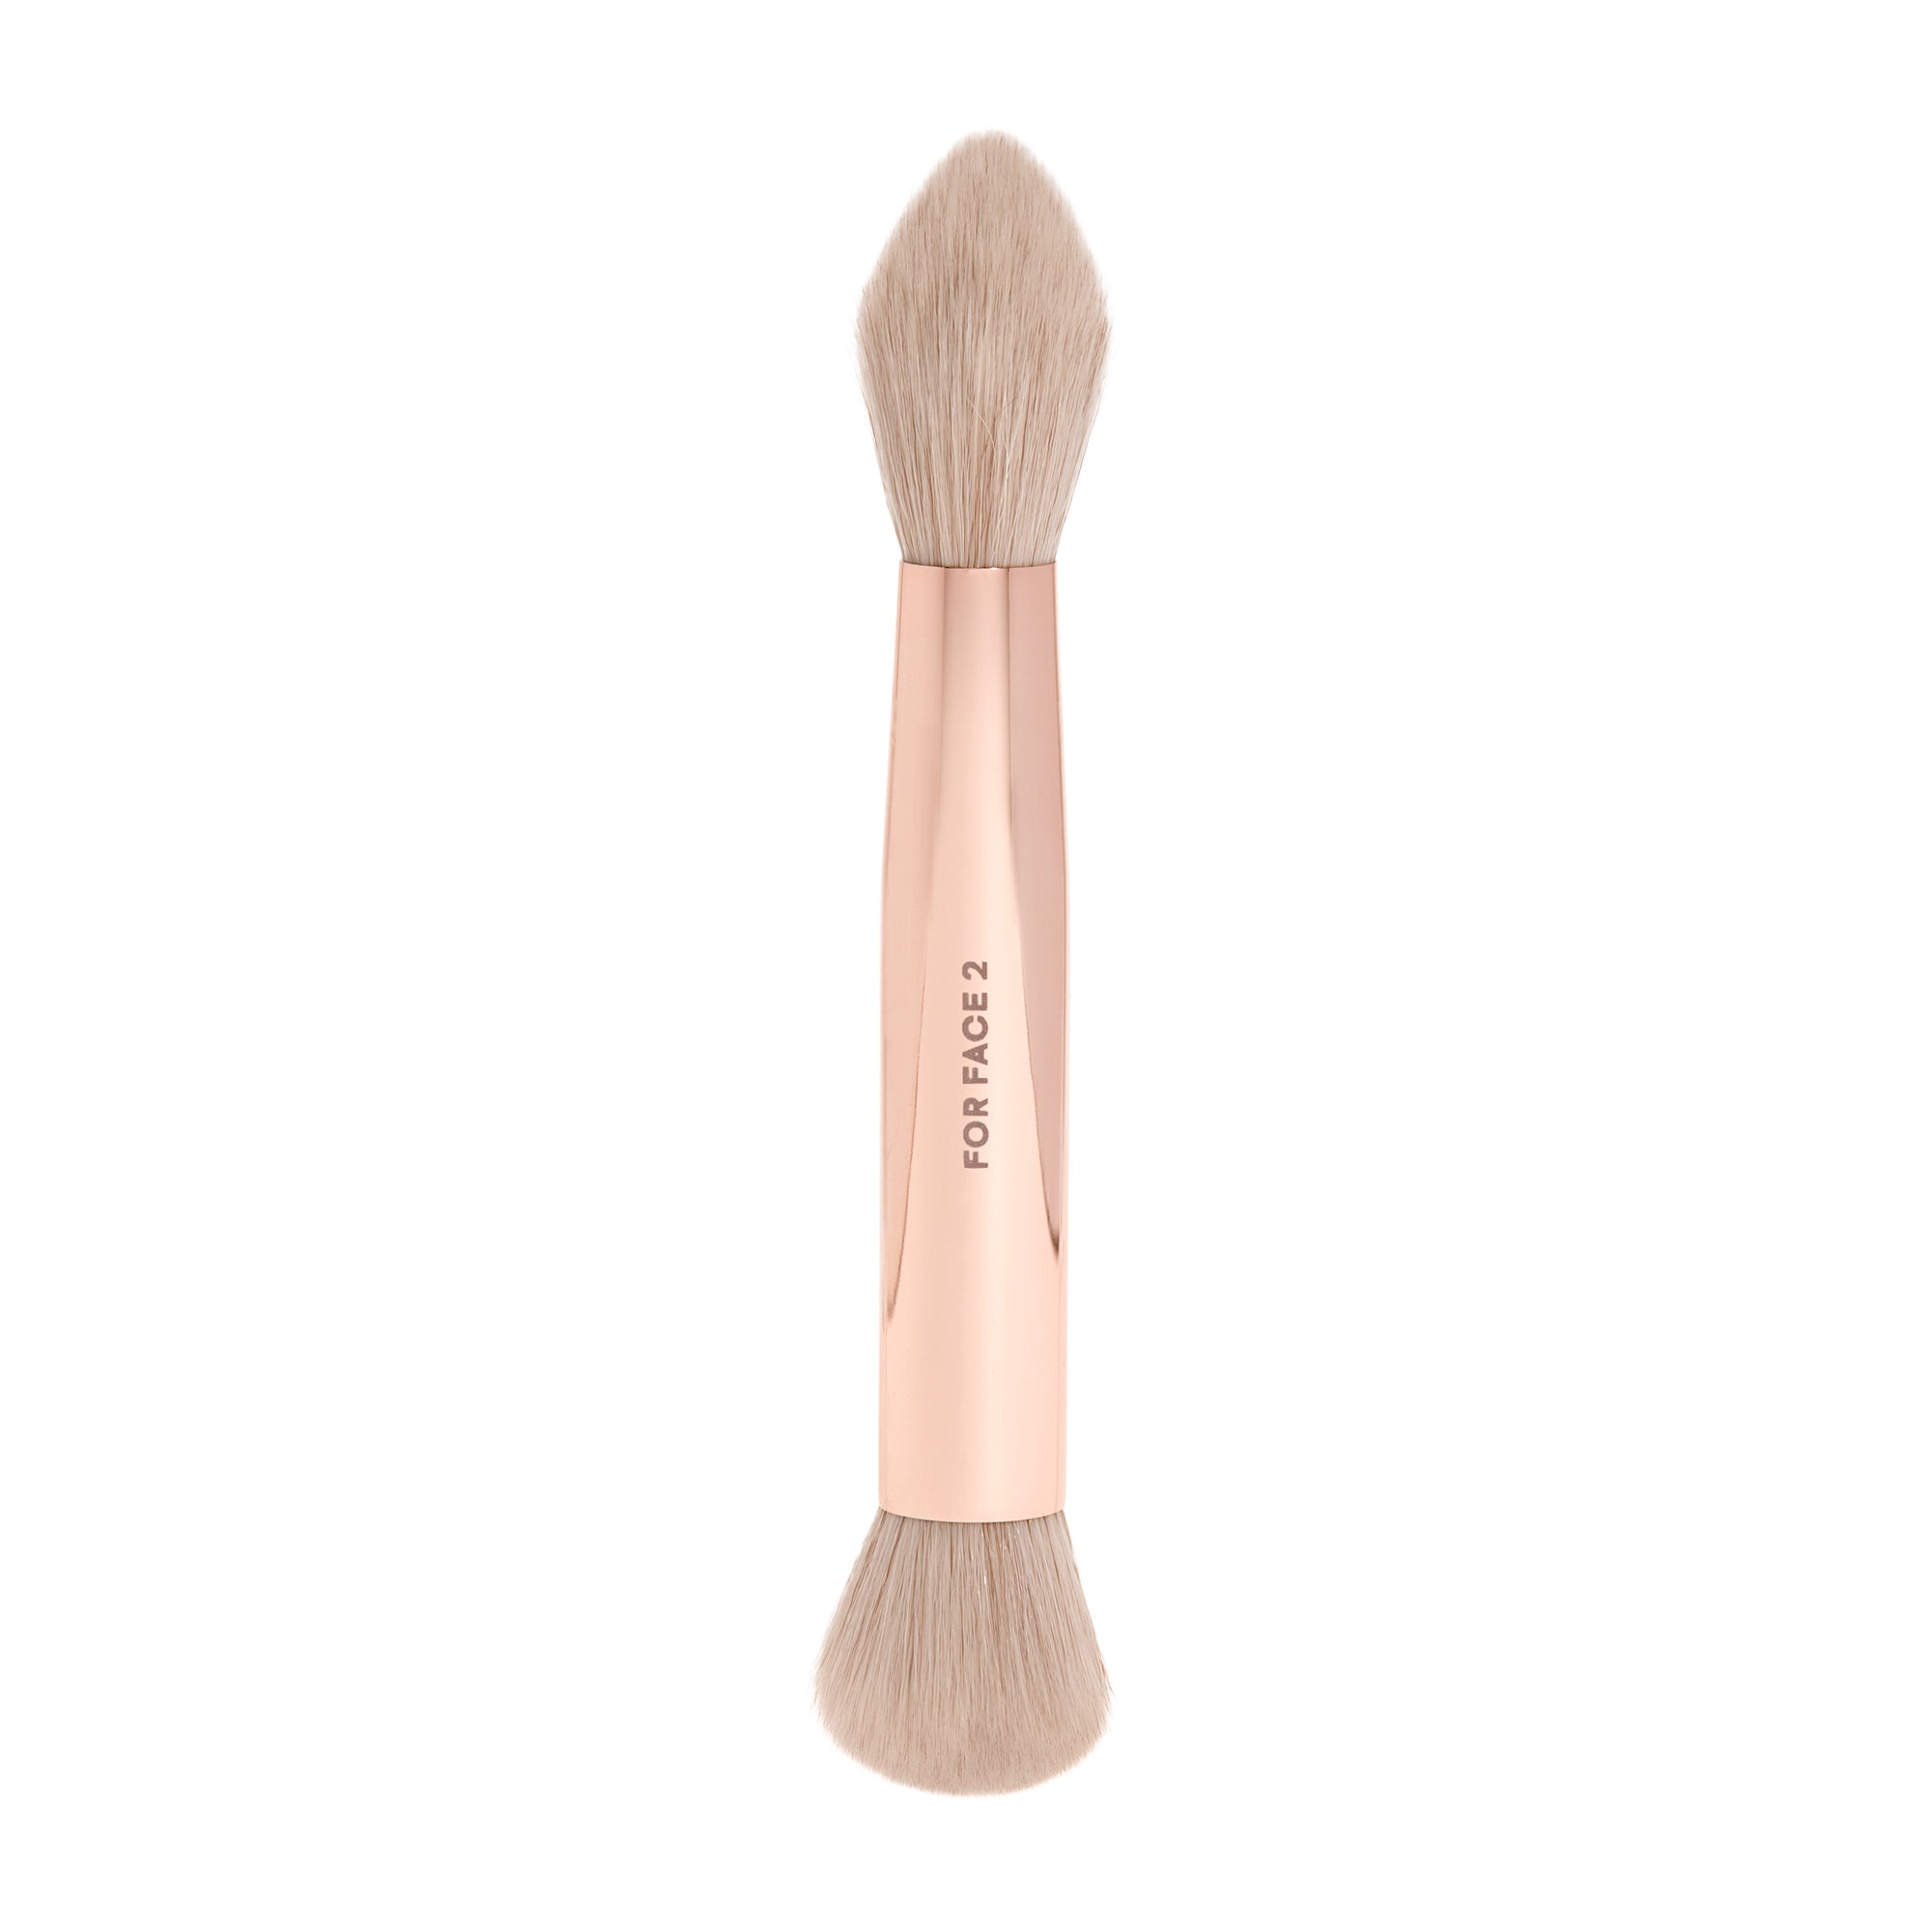 The @patrick ta nose contour brush is very much tika approved #gogeti